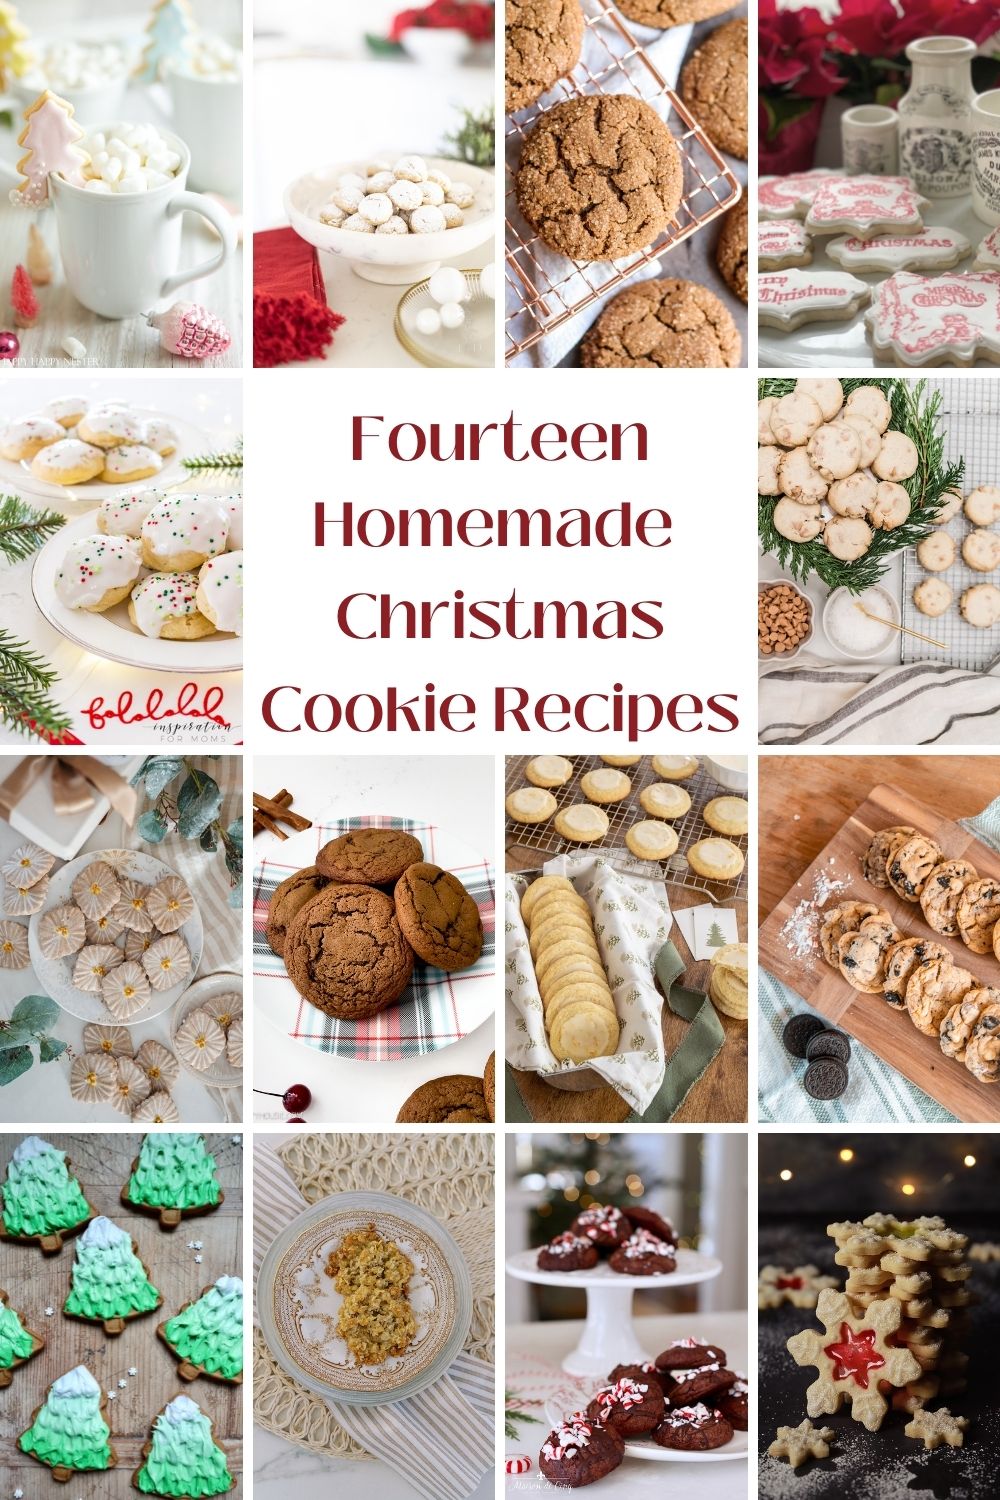 I love making cookies with royal icing every holiday season. Today I am sharing how I made these Classic Christmas Cookies for our Christmas party!